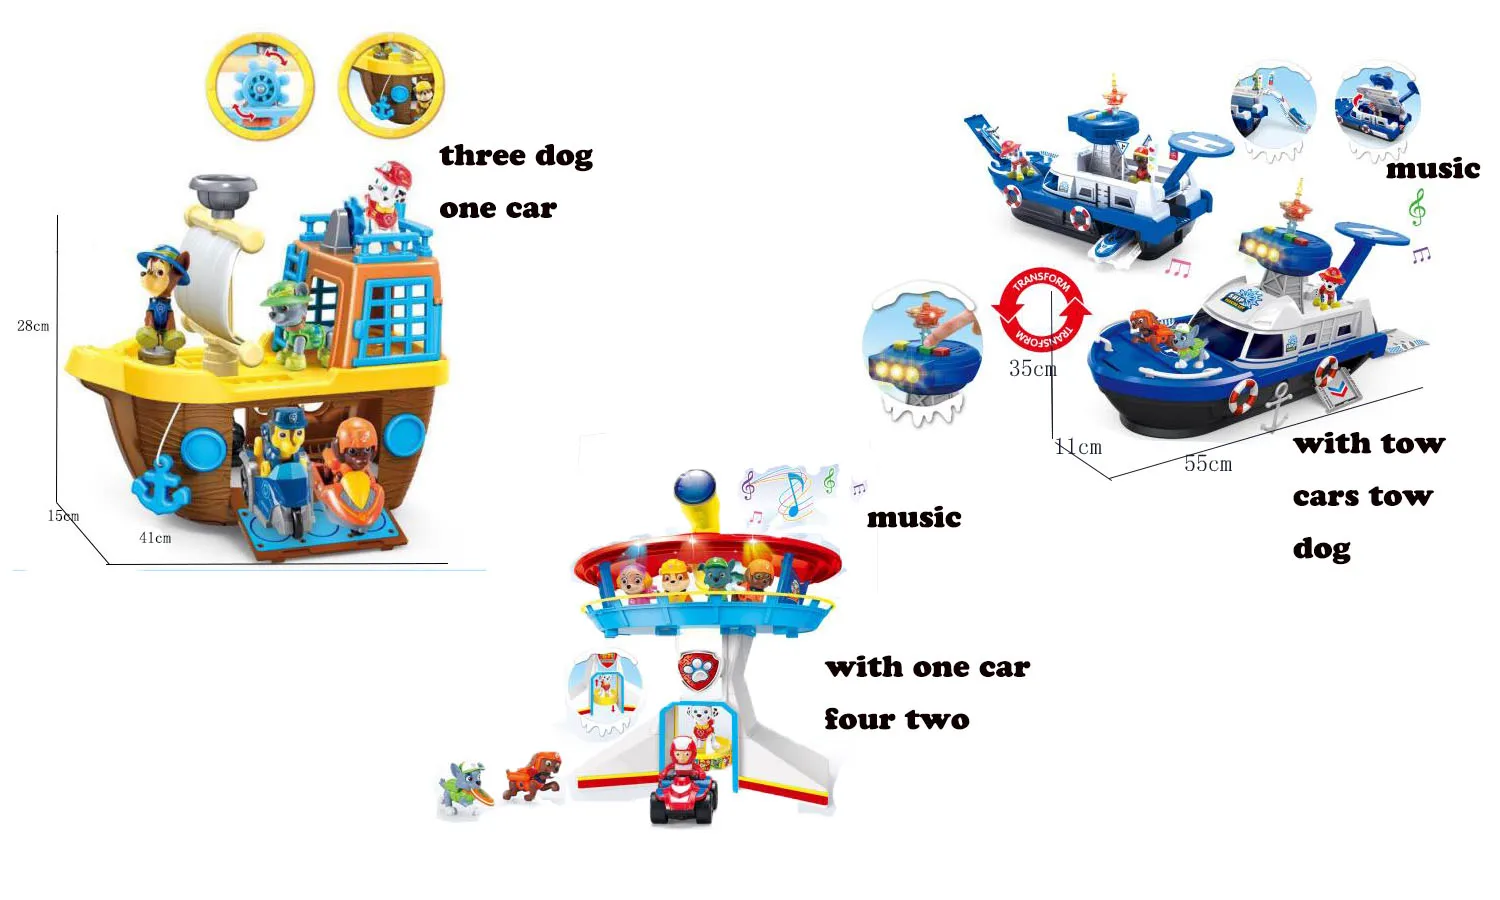 

Paw Patrol Car Motorboat Bus Lookout Tower with Music Patrulla Canina Psi Patrol Car Action Figures Toys for Children Gifts